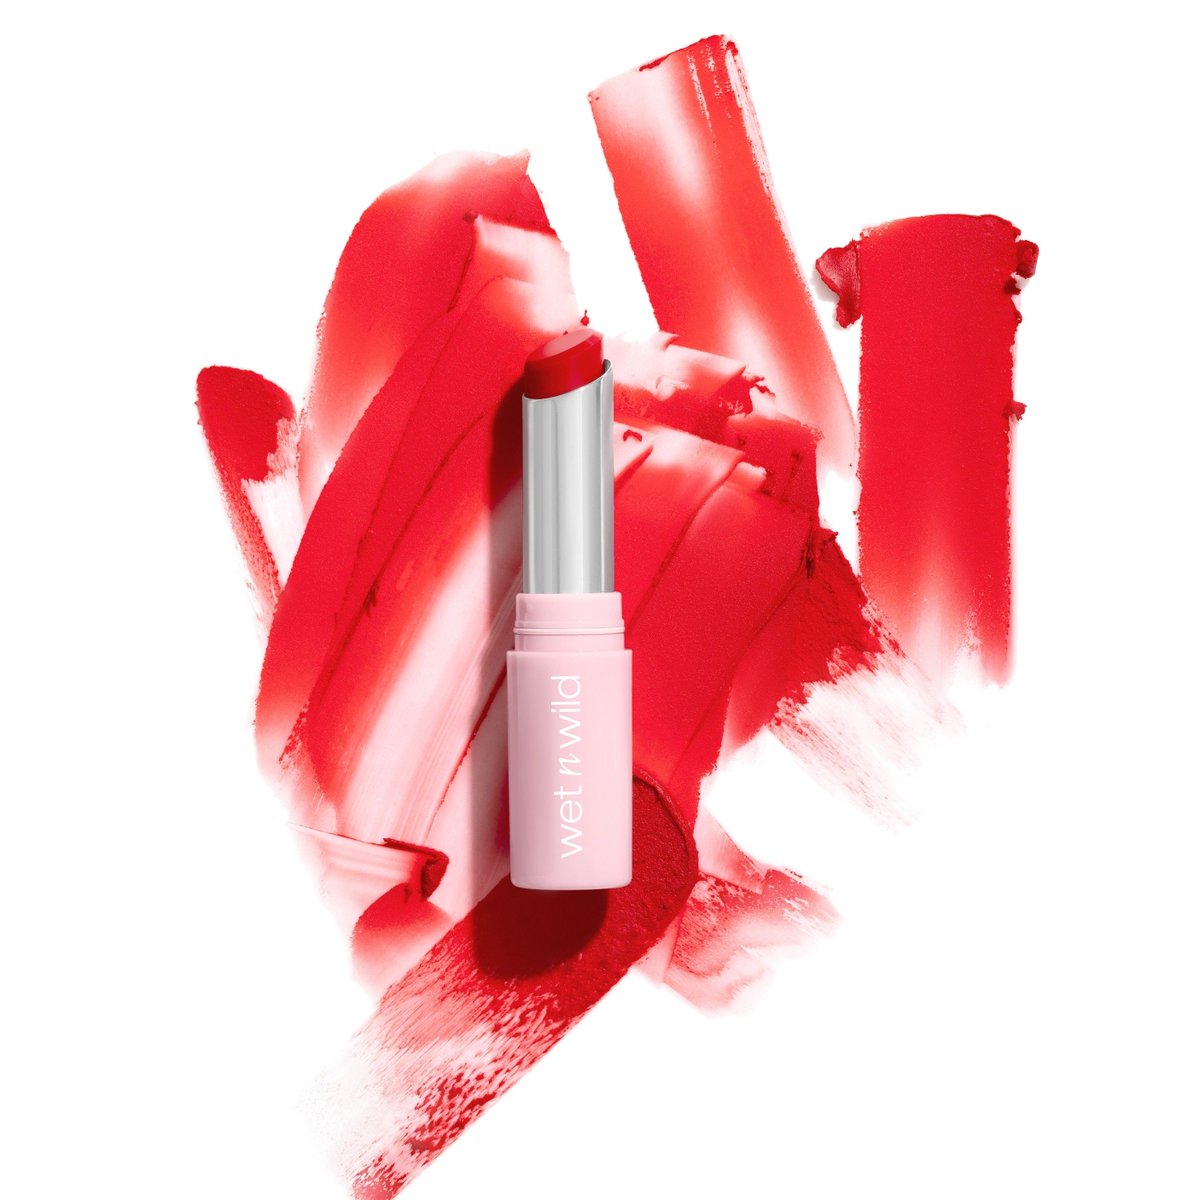 Red hot lips, but make them soft as petals 🏎️🌹 We did that with Soft Blur Matte Lipstick 'Little Red Rosette'⁠
⁠
Get them @target @walgreens @cvspharmacy and shop our #Amazon store at #LinkInBio #wnwSoftBlur #wetnwildbeauty #crueltyfree